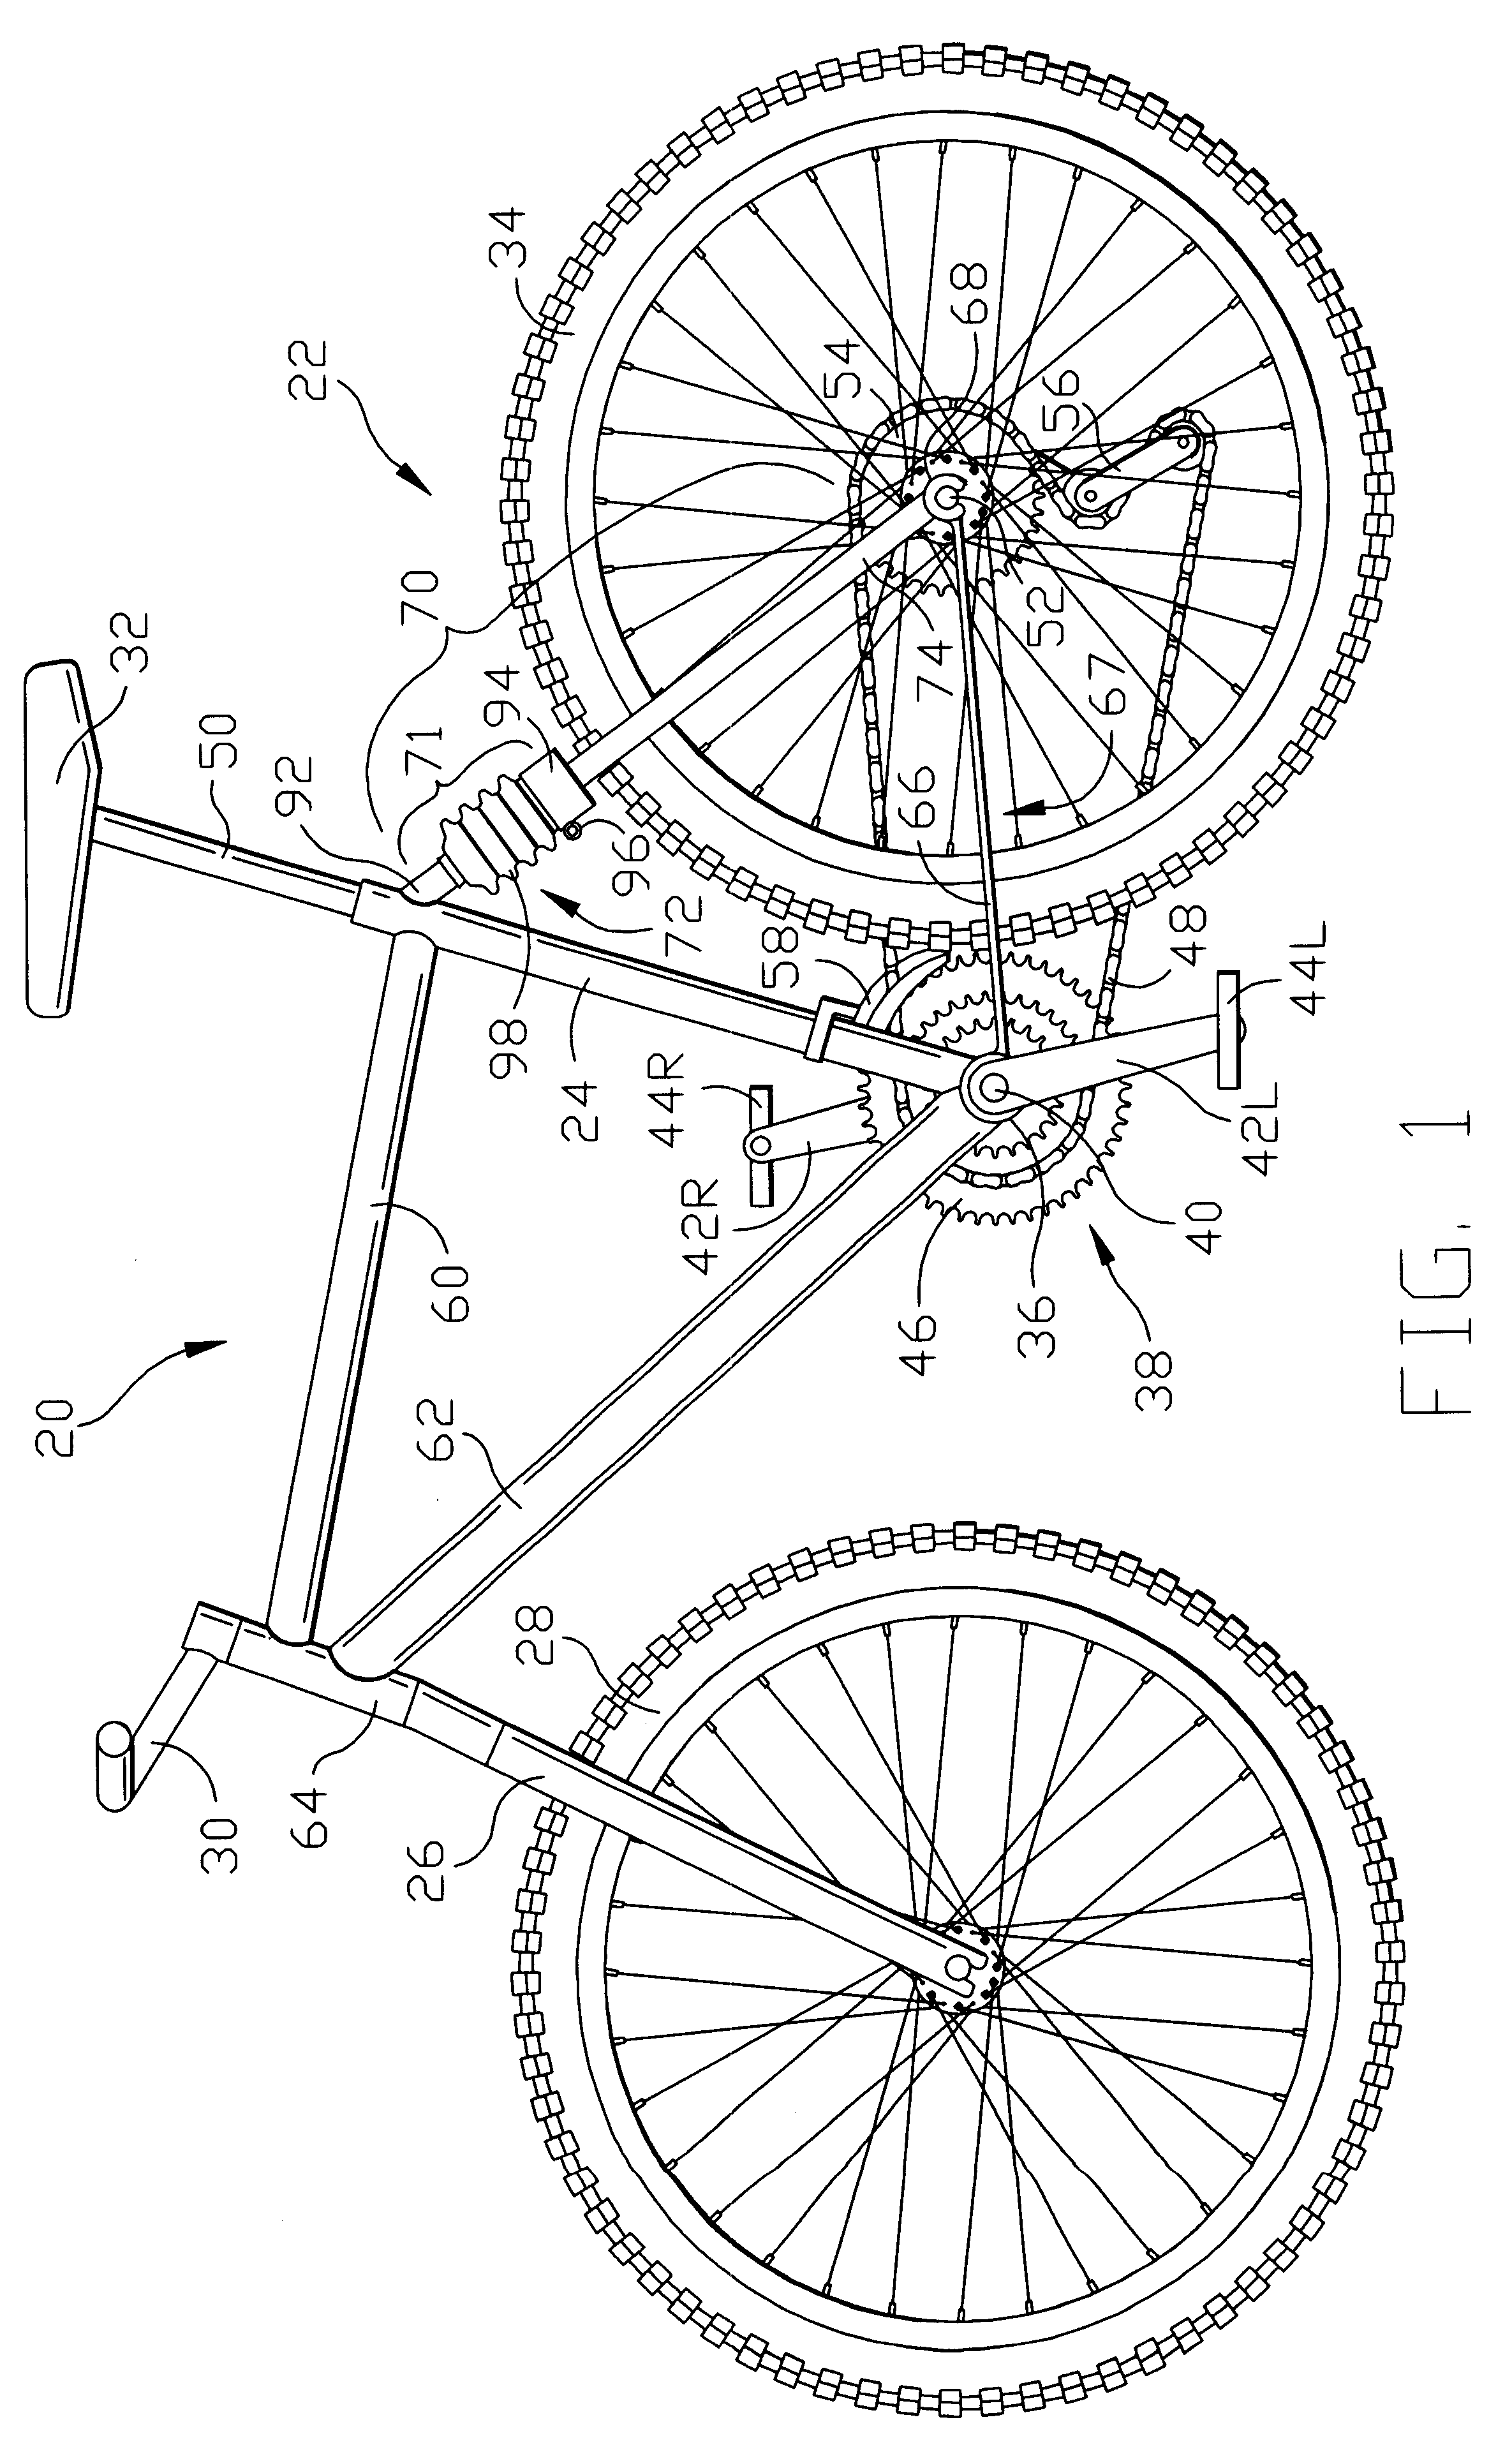 Pivotless rear suspension system for bicycles